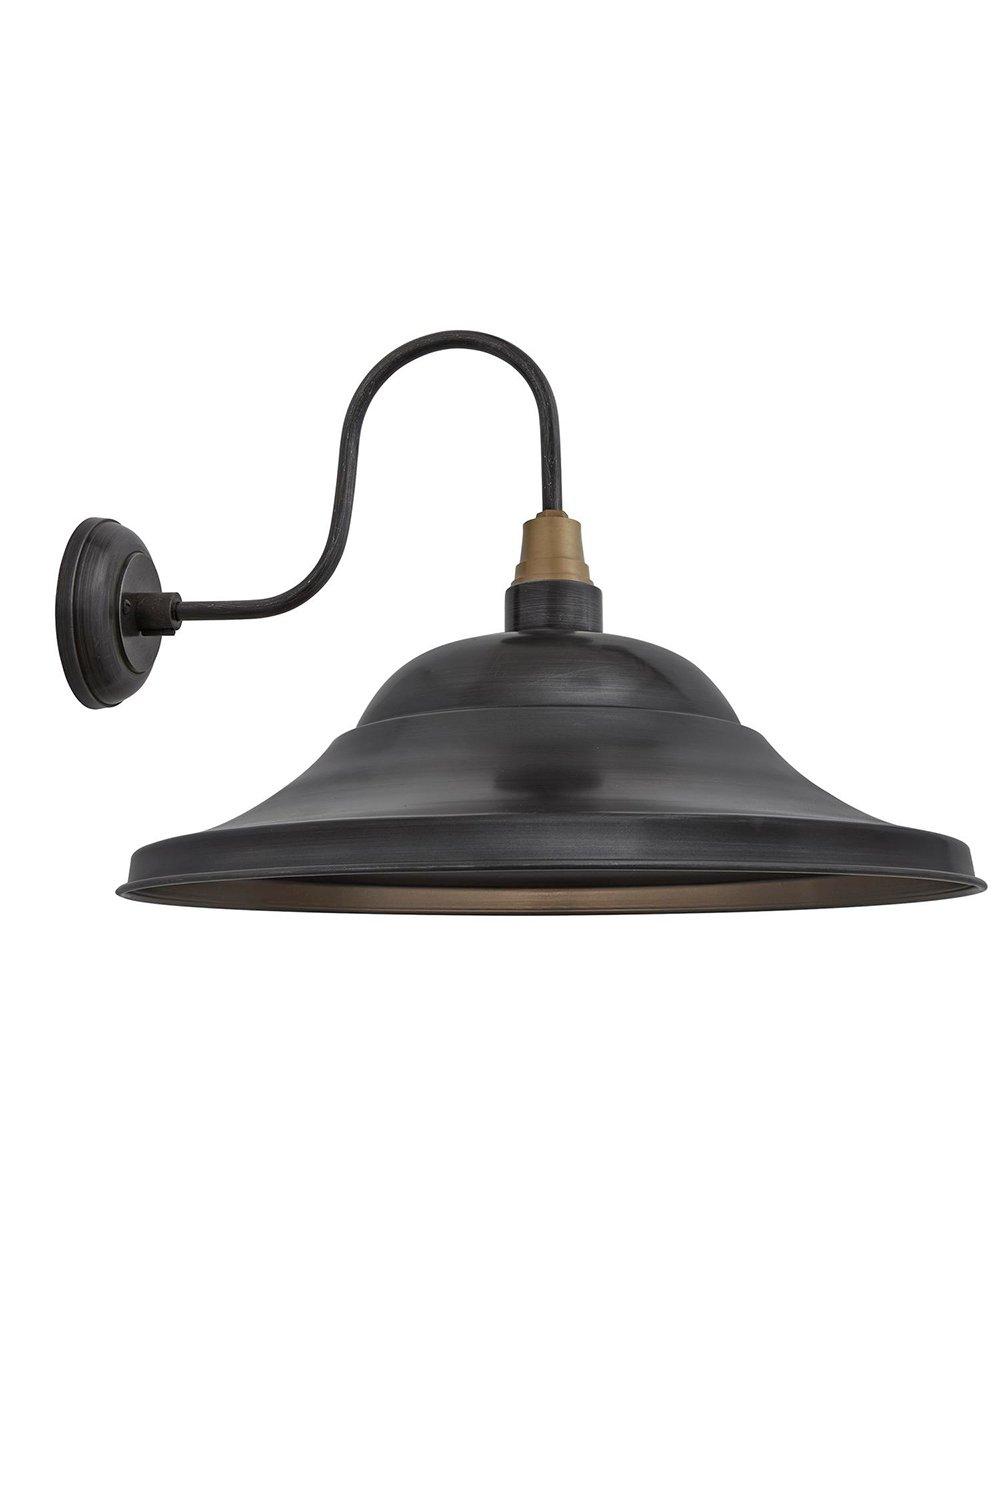 Swan Neck Giant Hat Wall Light, 21 Inch, Pewter